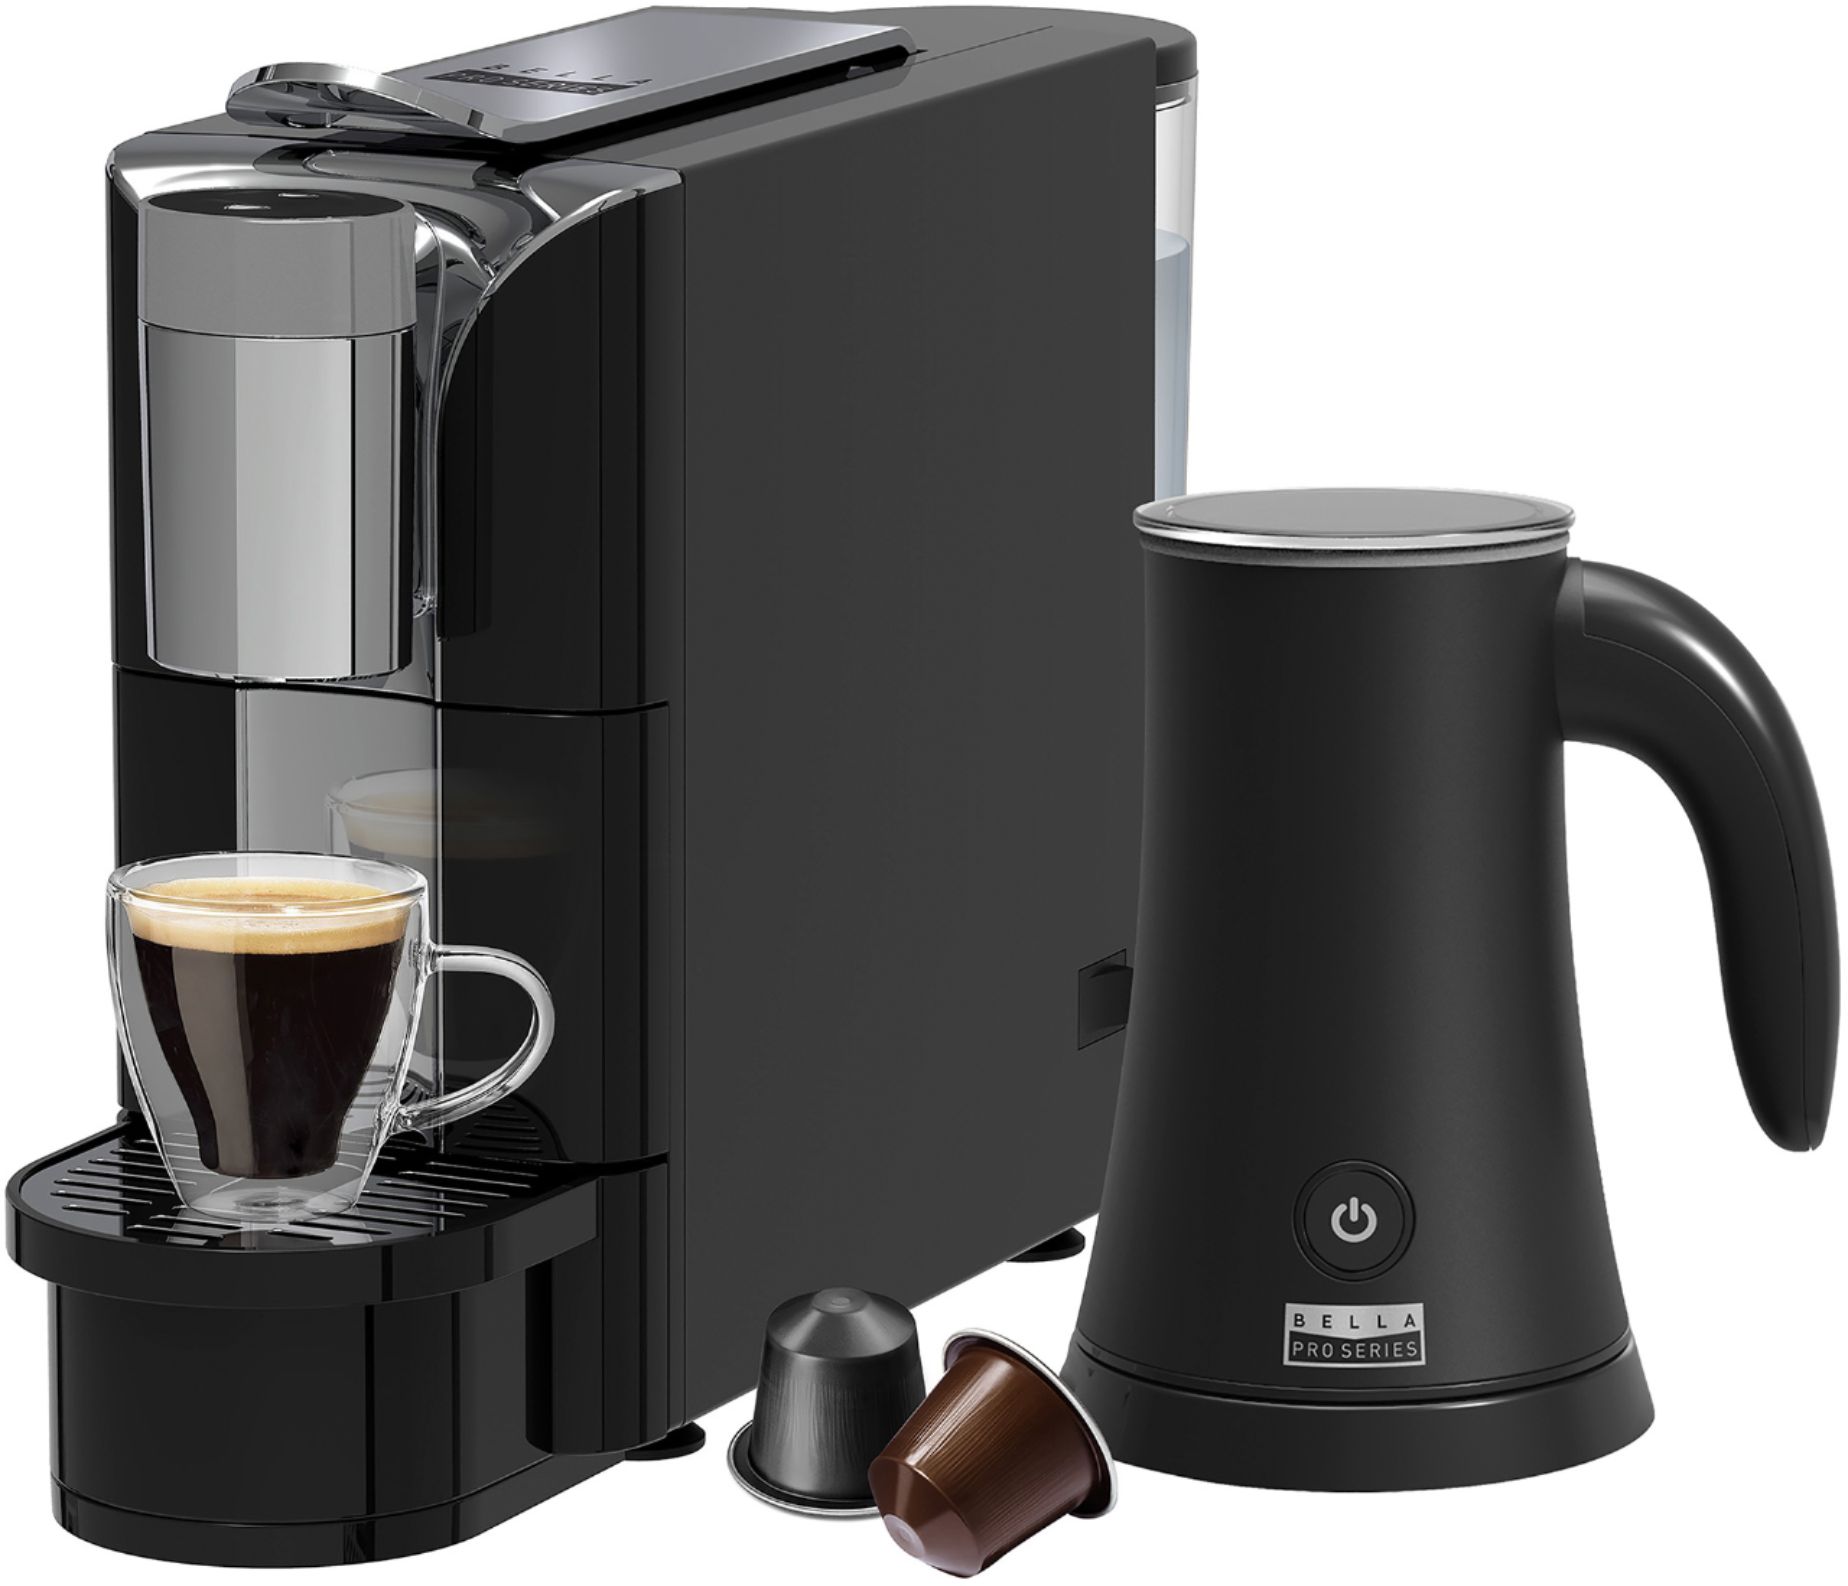 Bella Pro Series - Capsule Coffee Maker and Milk Frother - Black $49.99 + Free Shipping